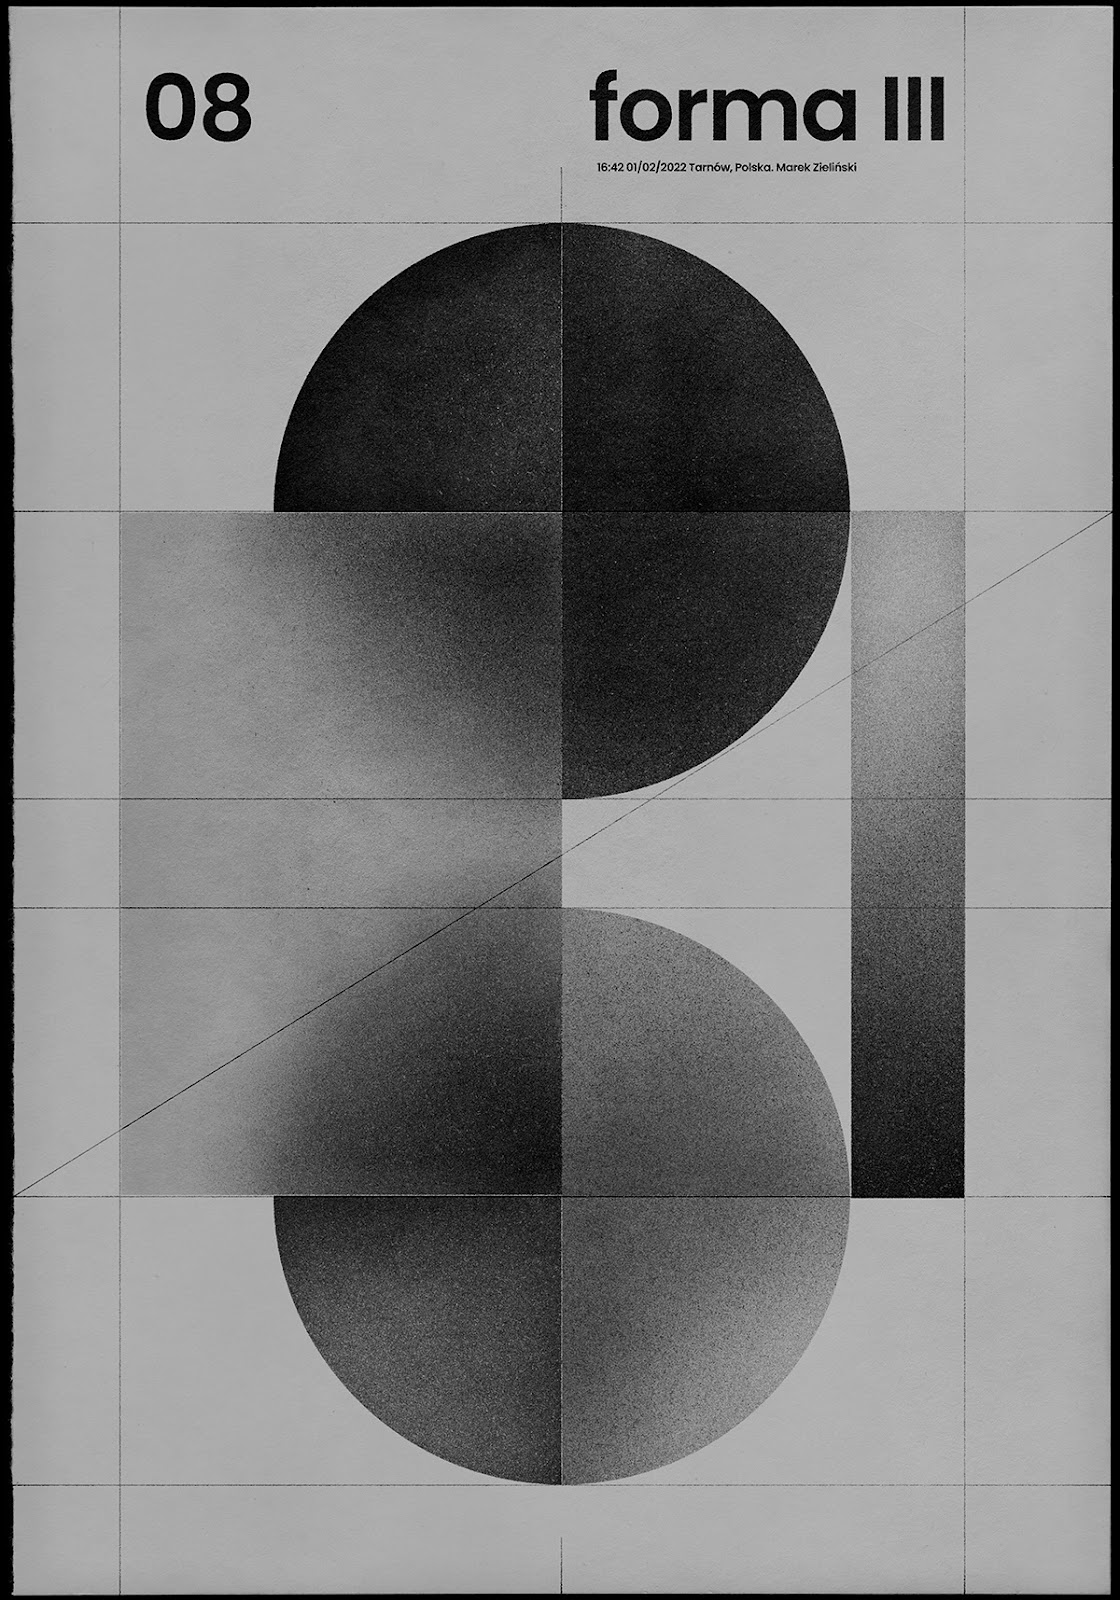 abstraction artworks black and white modern art Modern Design poster poster art Poster Design posters shapes